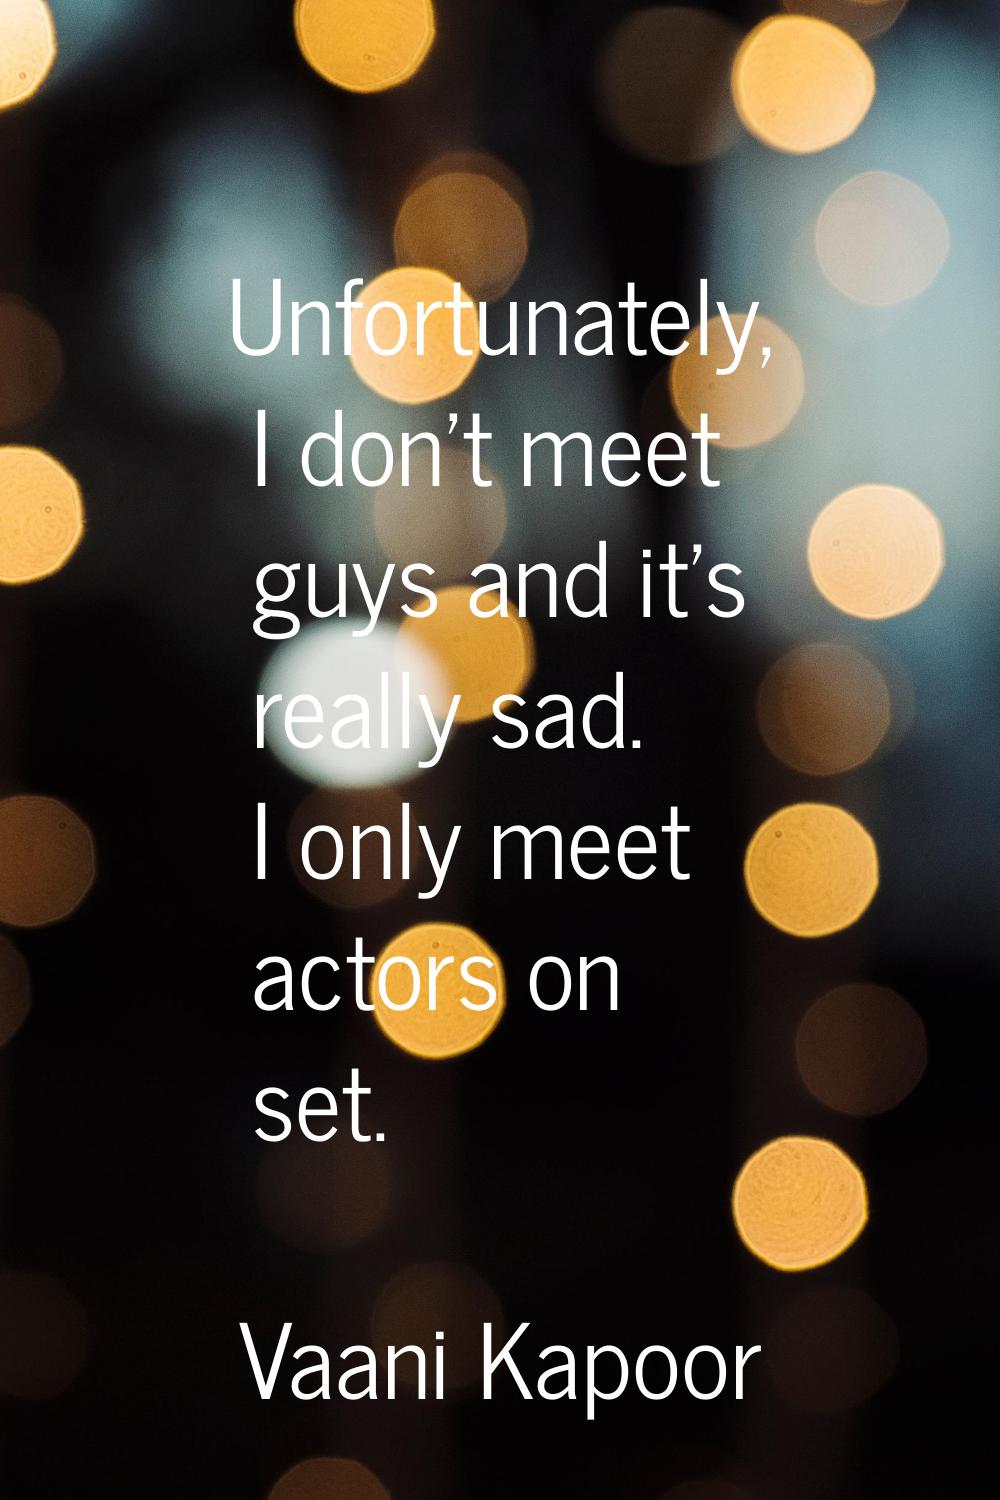 Unfortunately, I don't meet guys and it's really sad. I only meet actors on set.